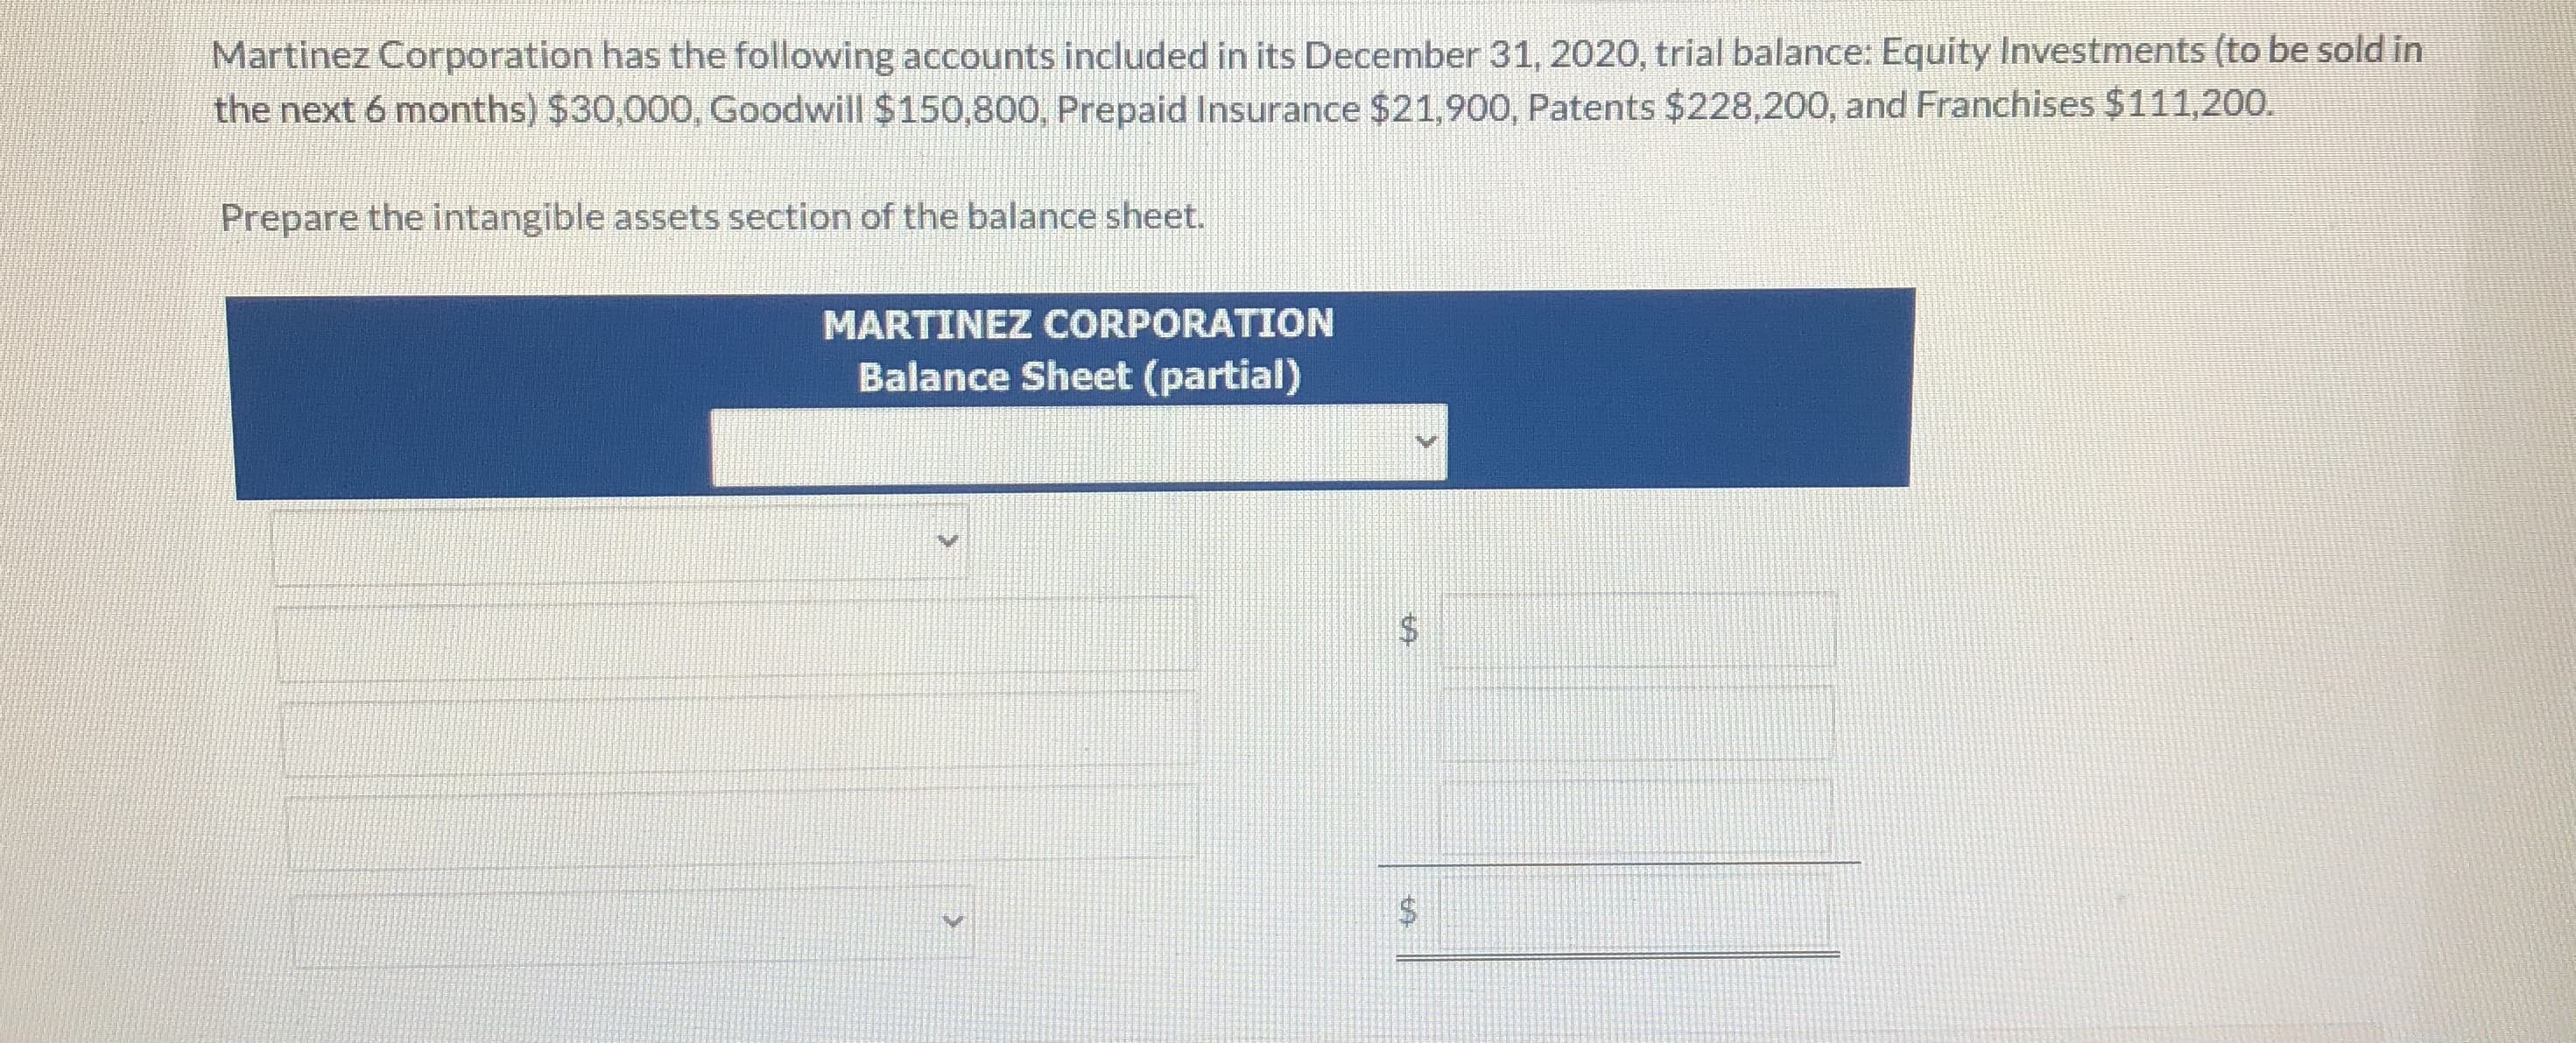 Martinez Corporation has the following accounts included in its December 31, 2020, trial balance: Equity Investments (to be sold in
the next 6 months) $30,000, Goodwill $150,800, Prepaid Insurance $21,900, Patents $228,200, and Franchises $111,200.
Prepare the intangible assets section of the balance sheet.
